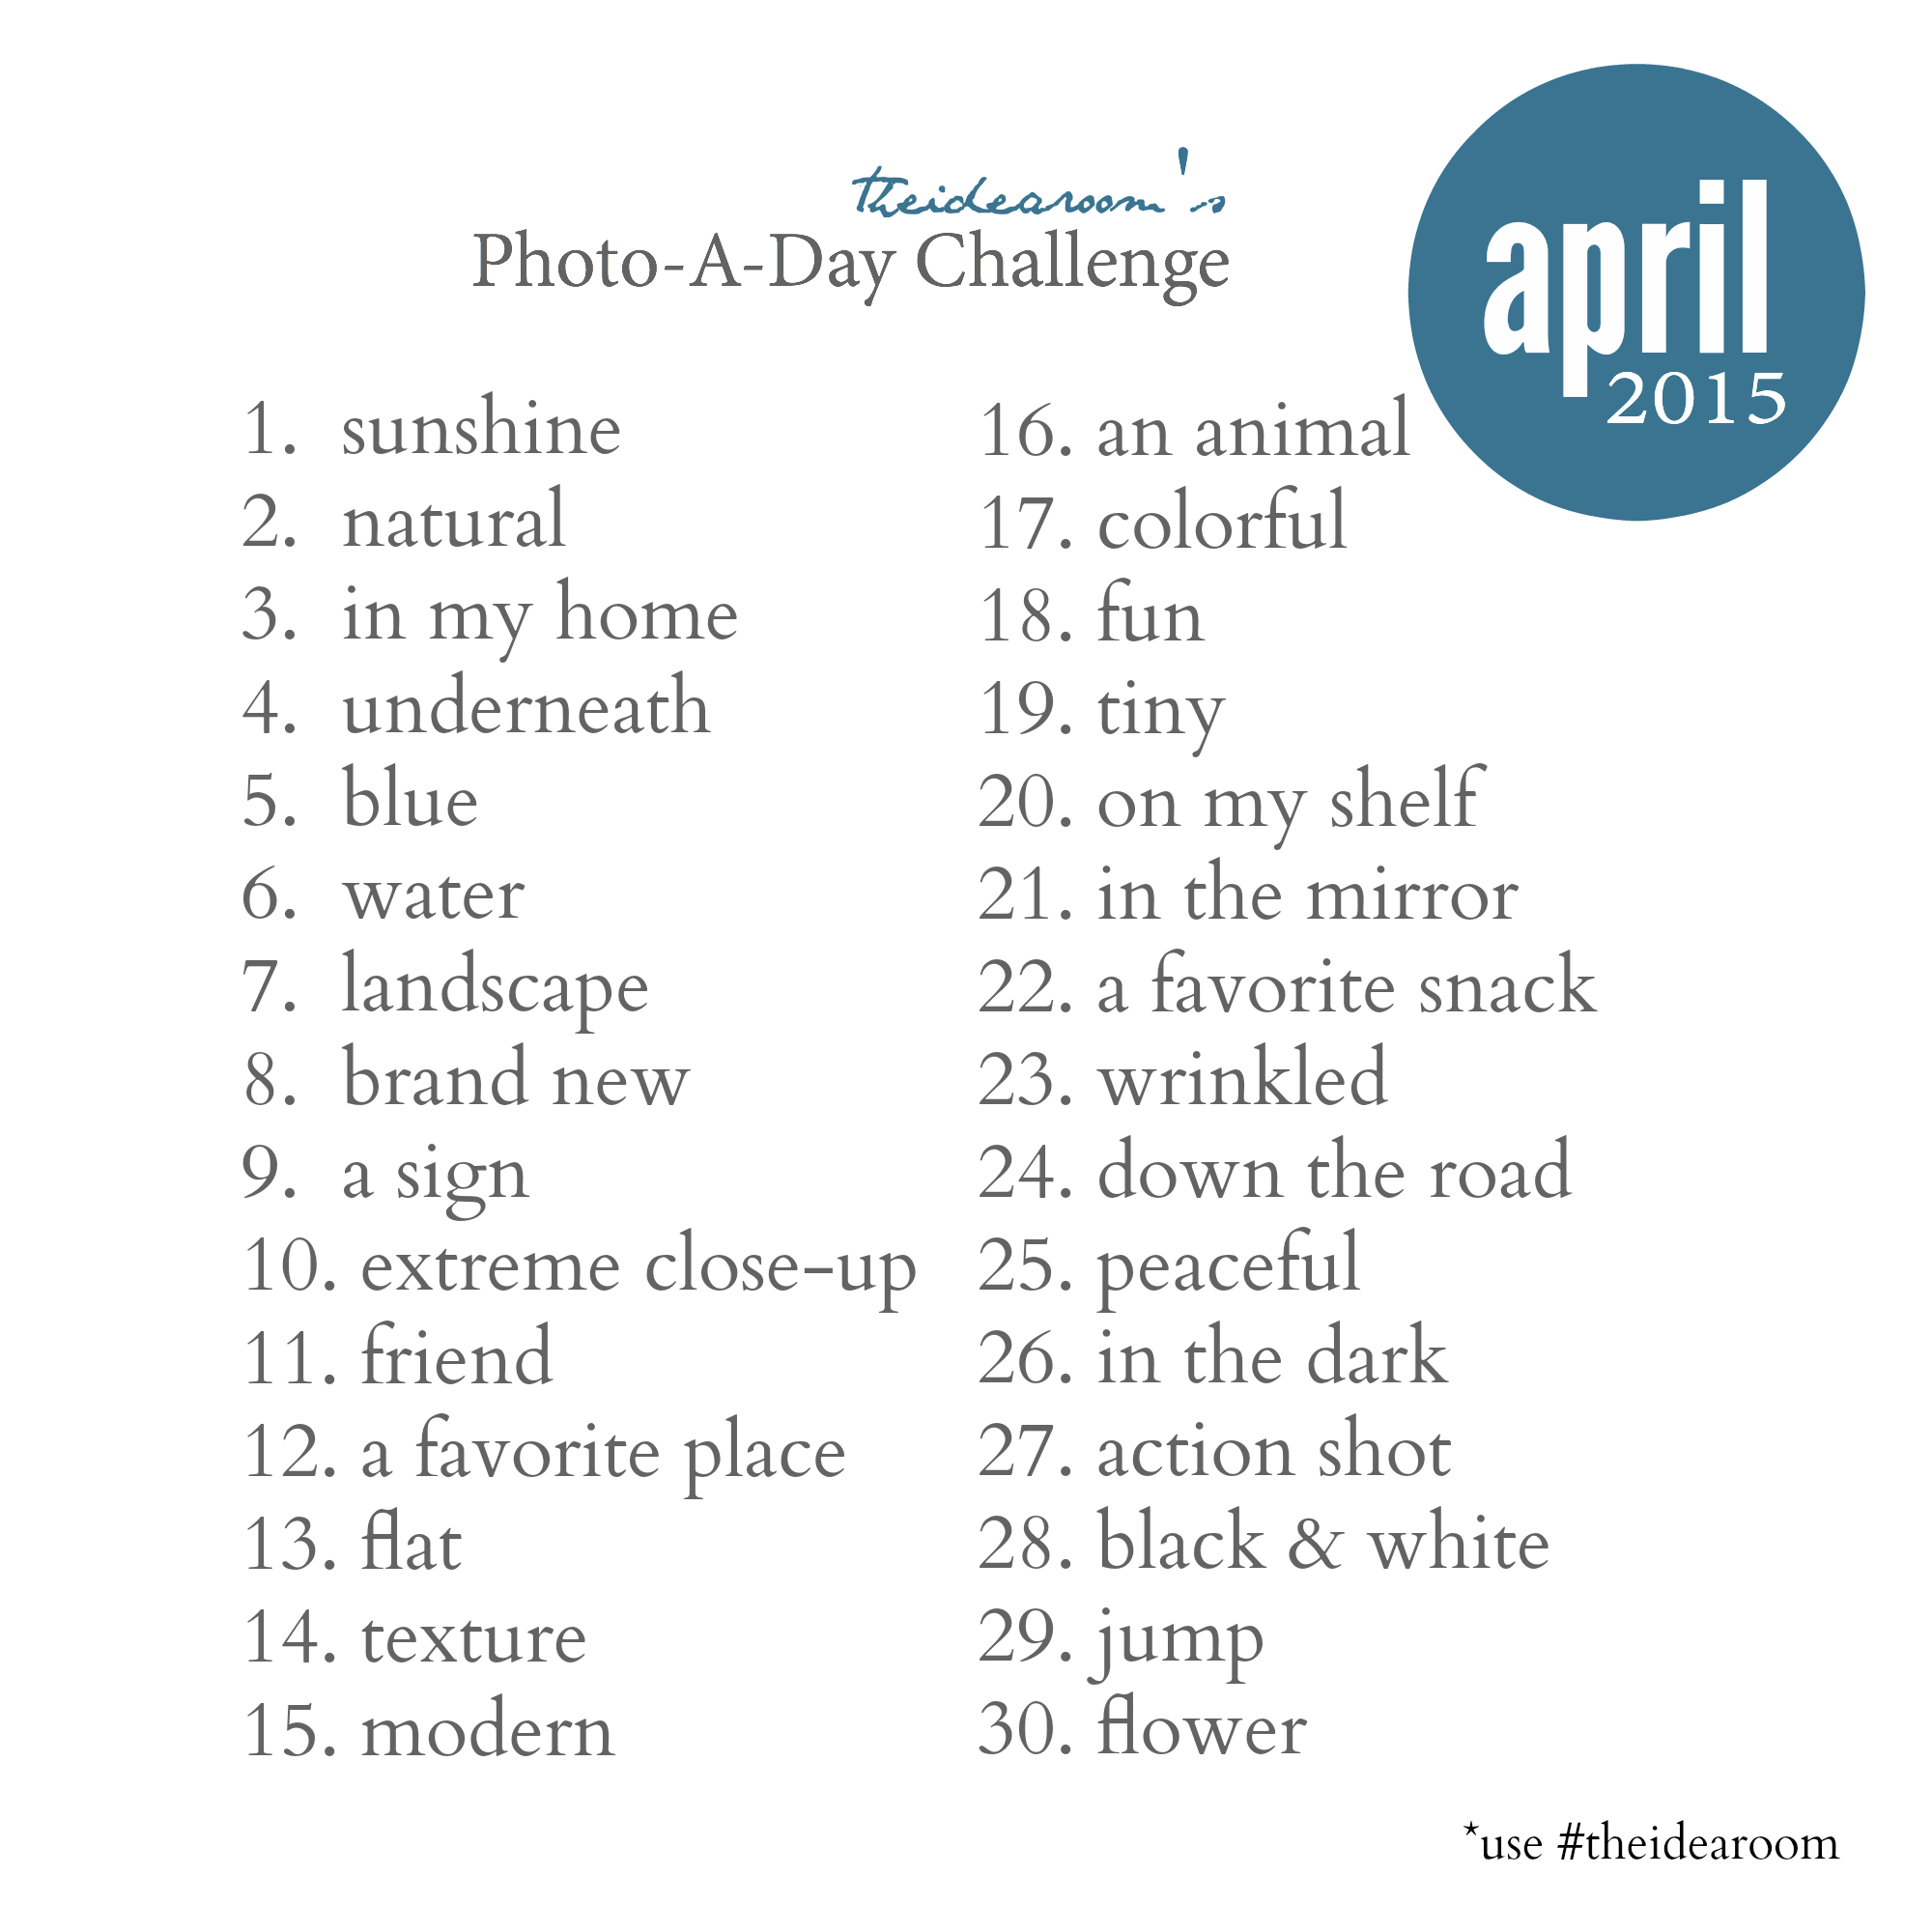 http://www.theidearoom.net/wp-content/uploads/2015/03/April-Photo-A-Day-Challenge-2015.png